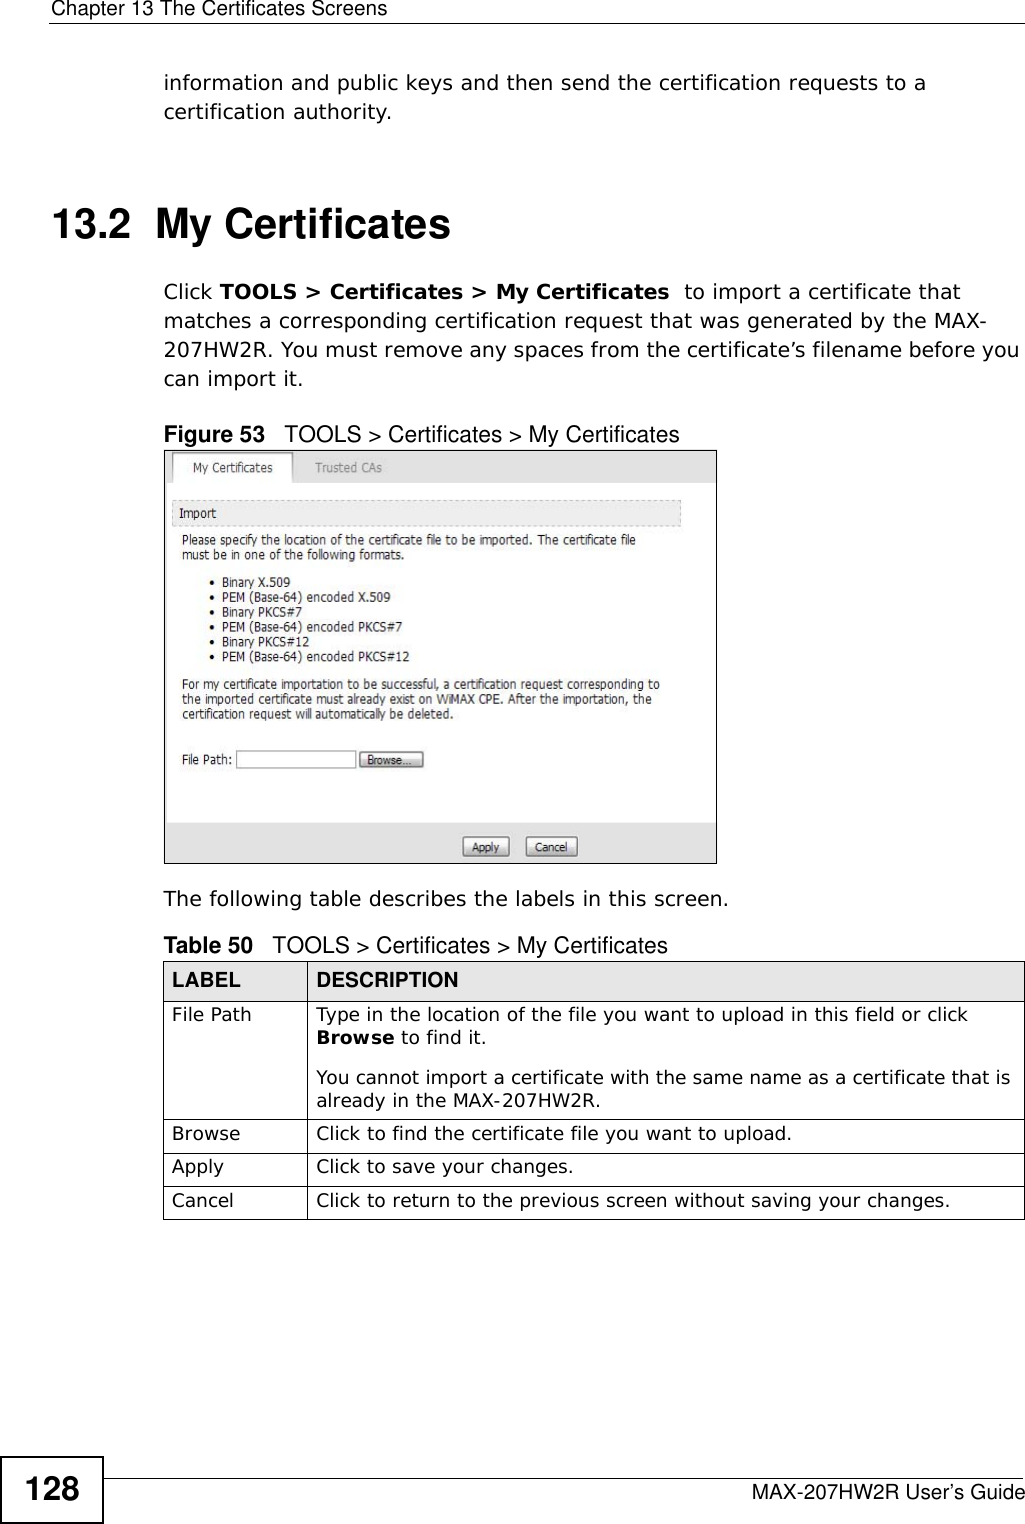 Chapter 13 The Certificates ScreensMAX-207HW2R User’s Guide128information and public keys and then send the certification requests to a certification authority. 13.2  My CertificatesClick TOOLS &gt; Certificates &gt; My Certificates  to import a certificate that matches a corresponding certification request that was generated by the MAX-207HW2R. You must remove any spaces from the certificate’s filename before you can import it.Figure 53   TOOLS &gt; Certificates &gt; My CertificatesThe following table describes the labels in this screen.  Table 50   TOOLS &gt; Certificates &gt; My CertificatesLABEL DESCRIPTIONFile Path Type in the location of the file you want to upload in this field or click Browse to find it.You cannot import a certificate with the same name as a certificate that is already in the MAX-207HW2R.Browse  Click to find the certificate file you want to upload. Apply Click to save your changes.Cancel Click to return to the previous screen without saving your changes.